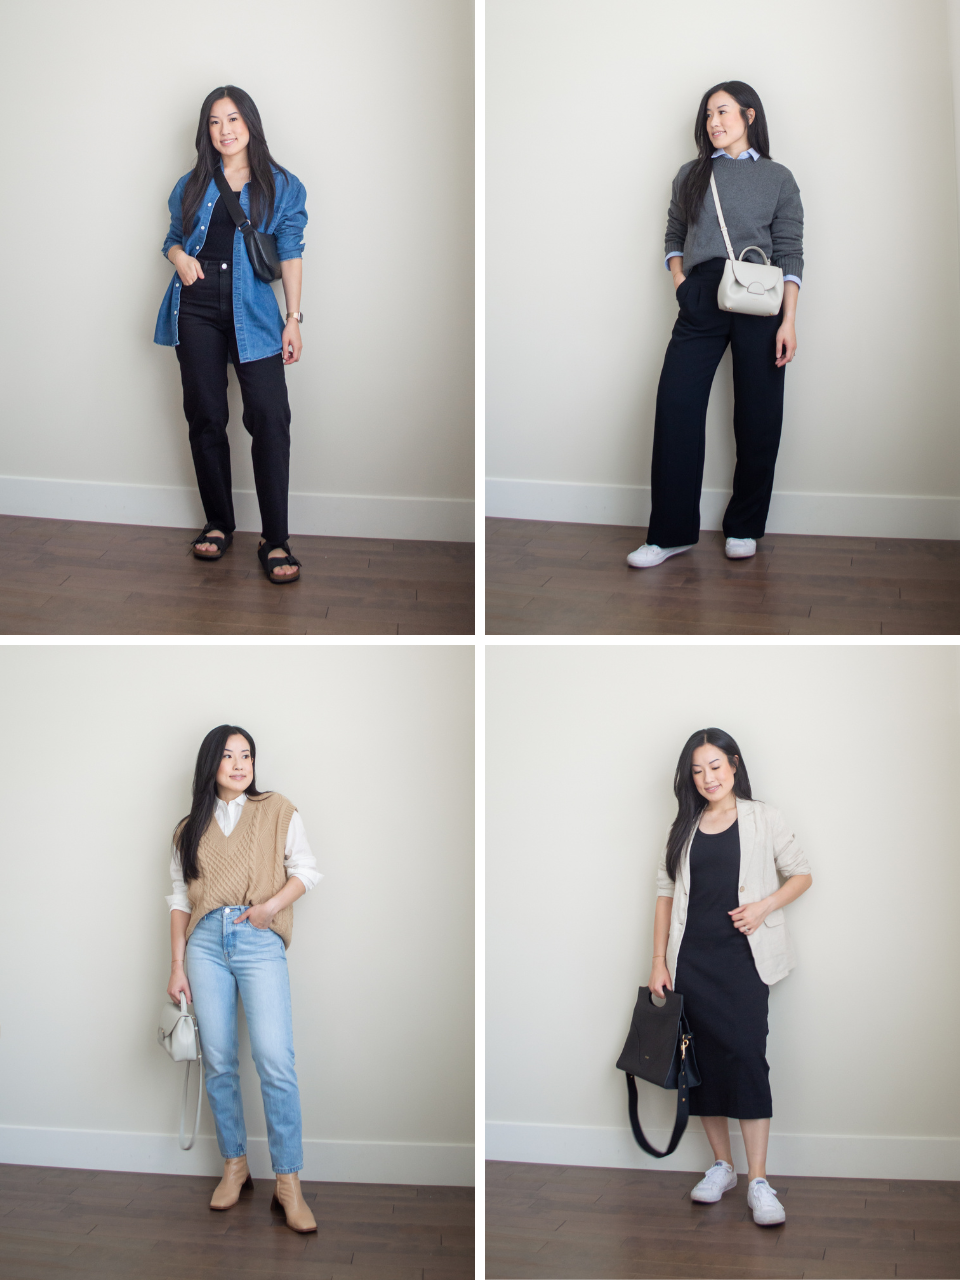 New Everlane Staples – Fall Wardrobe Essentials and How to Style